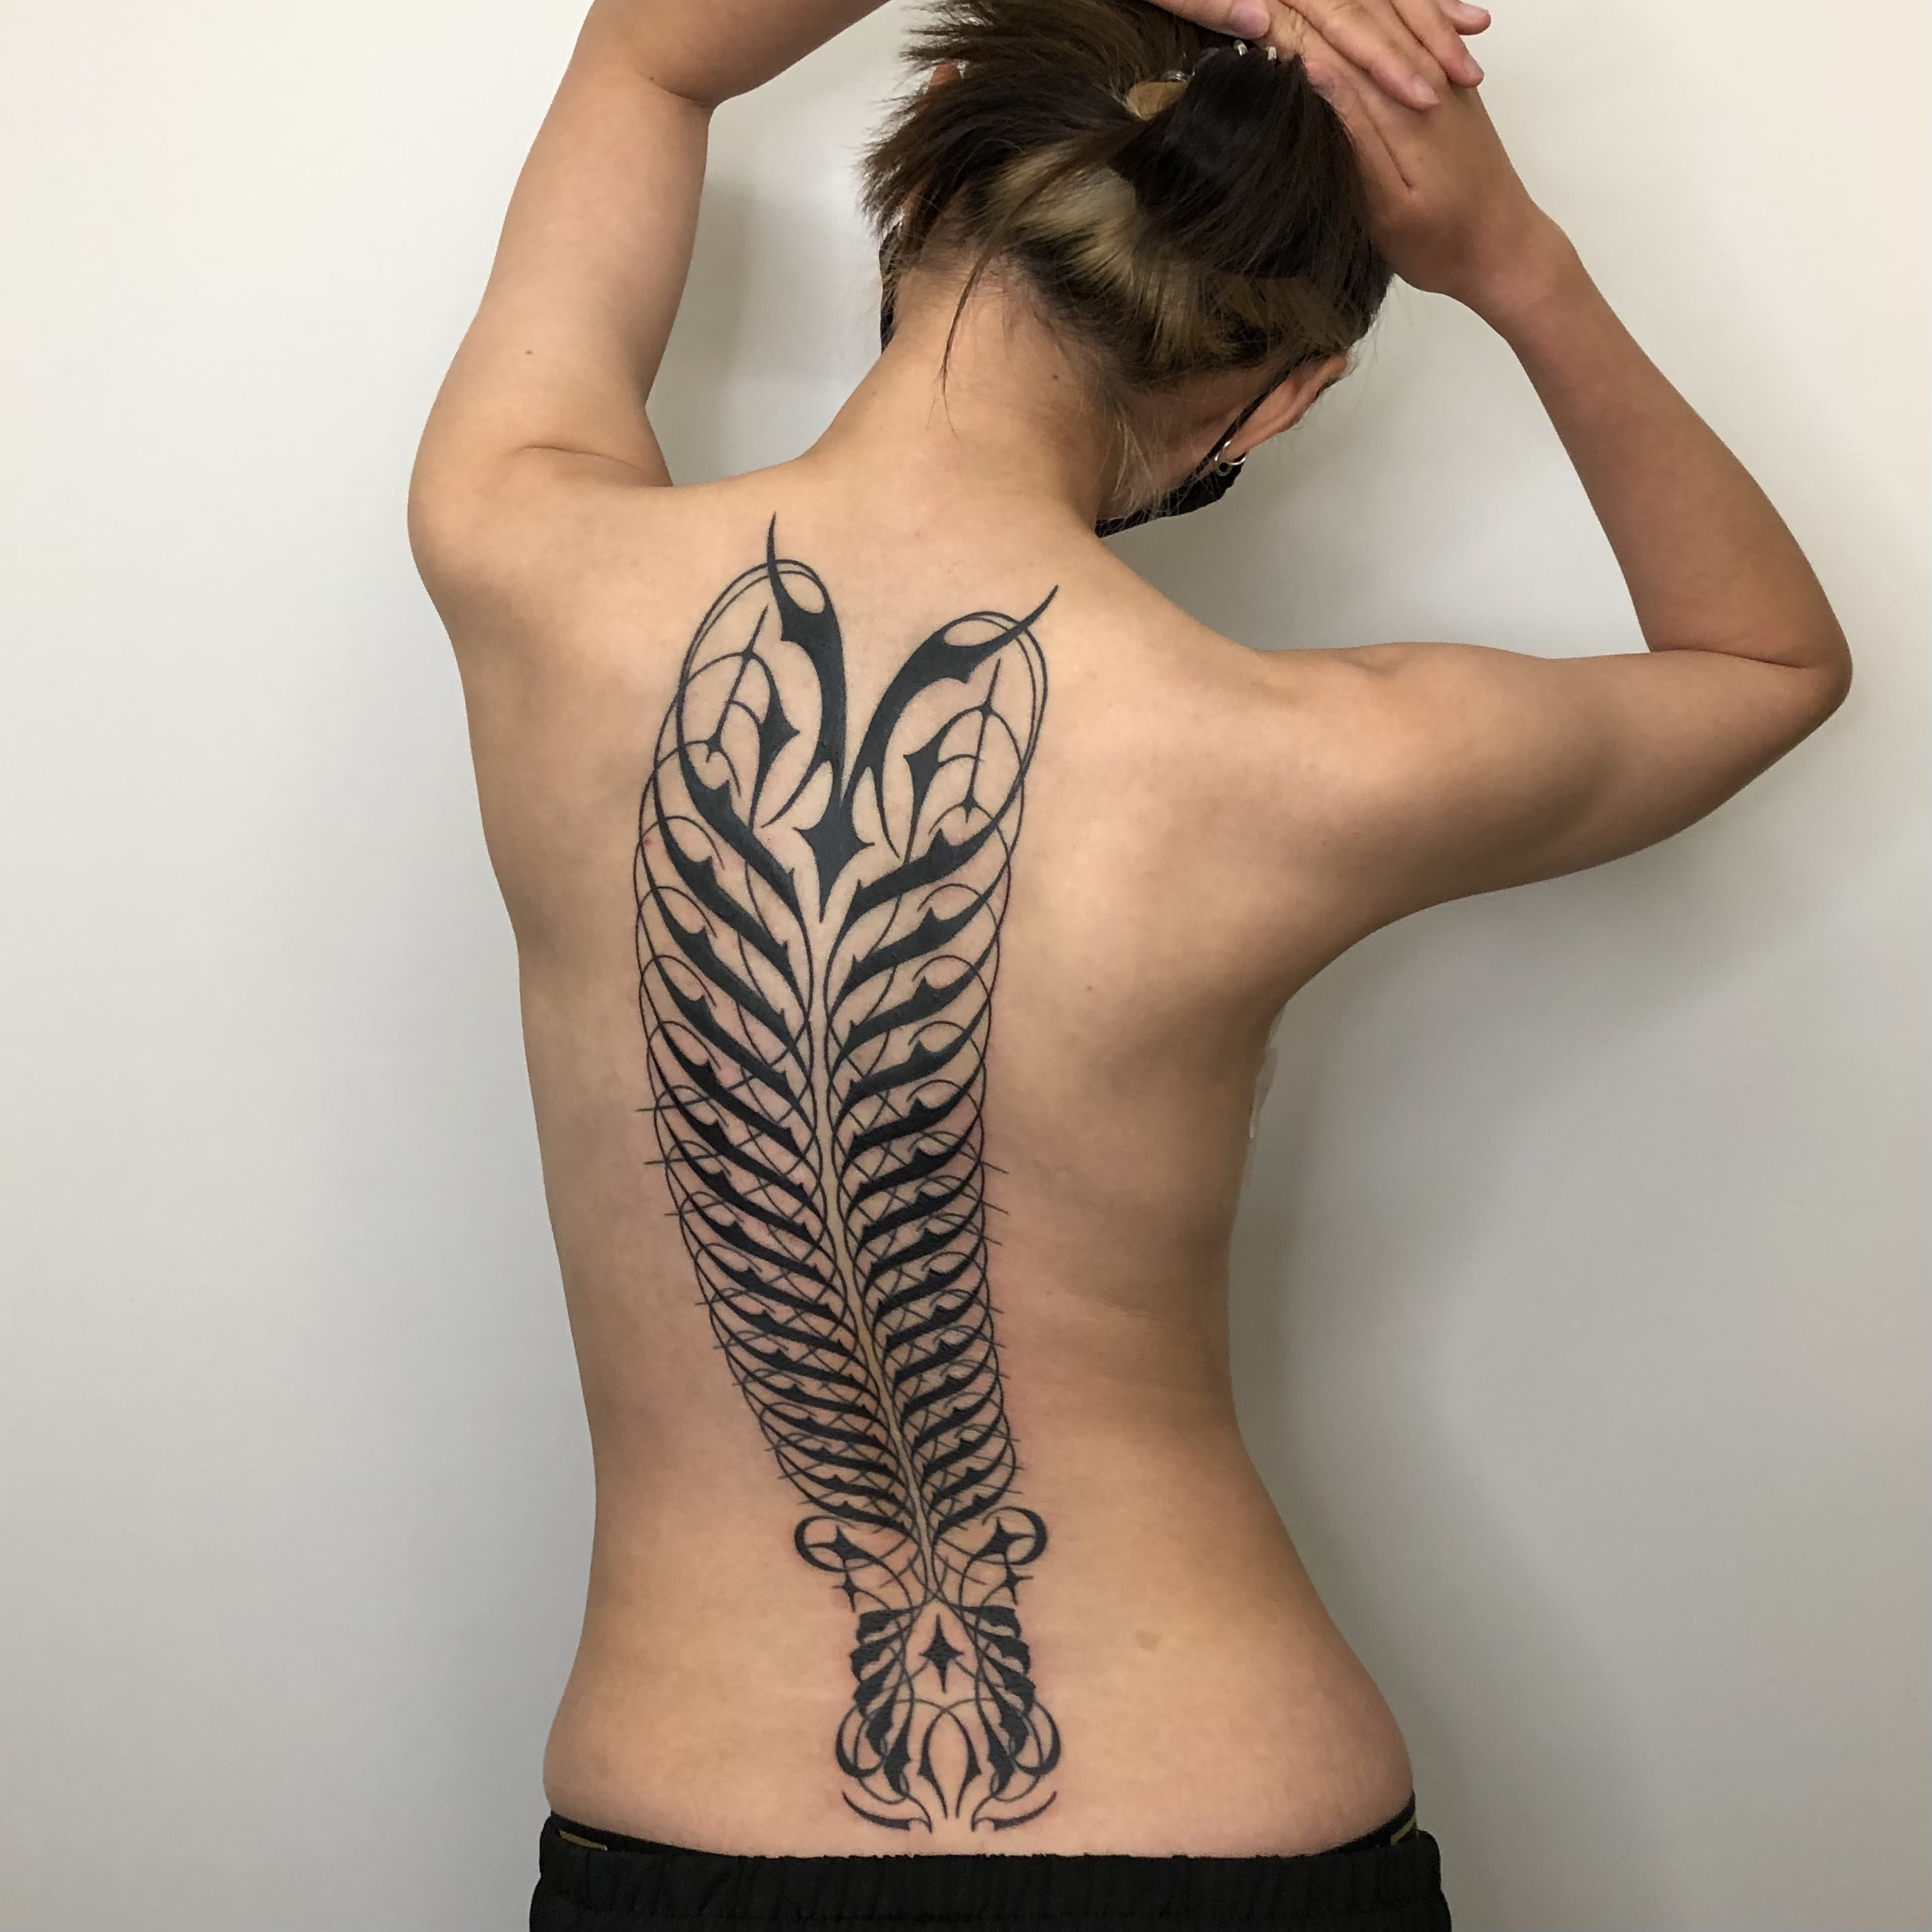 How Painful is a Spine Tattoo? - Inside Out